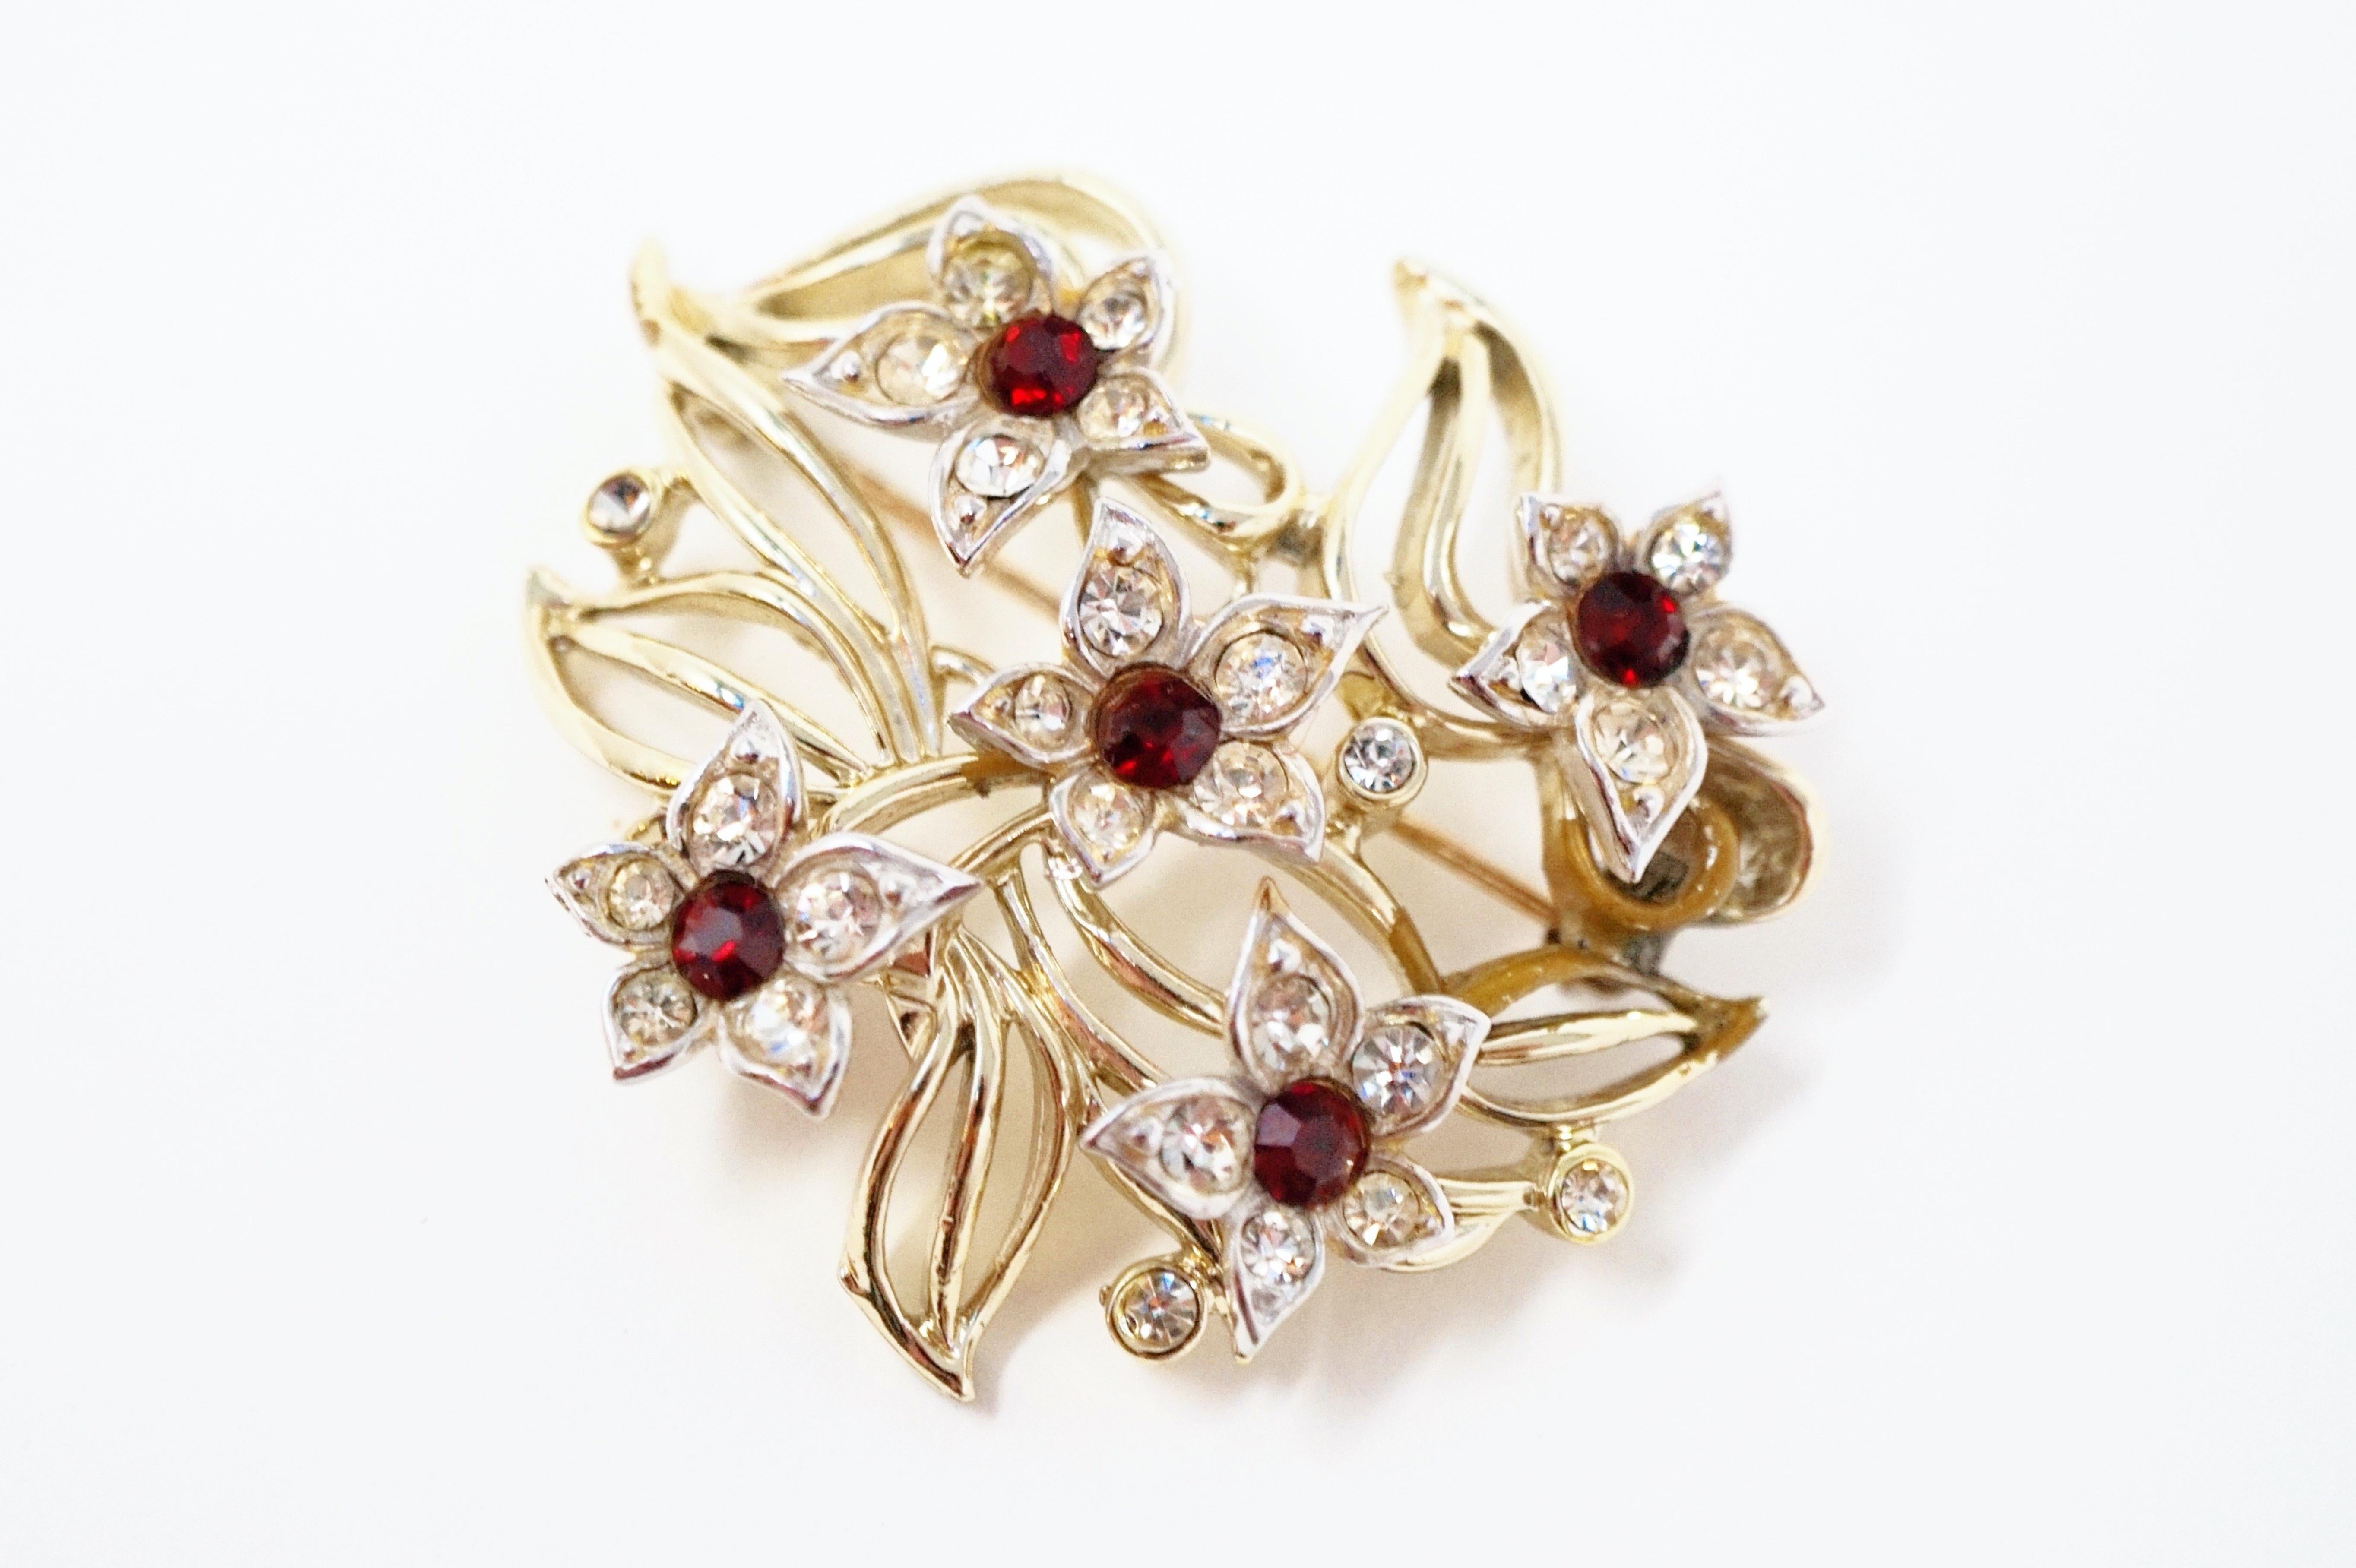 This beautiful vintage floral figural brooch is by iconic costume jewelry brand Kramer Jewelry, circa 1950s. Five silver tone flowers adorn this piece, with clear crystal rhinestones on each petal and a ruby red colored crystal rhinestone in the